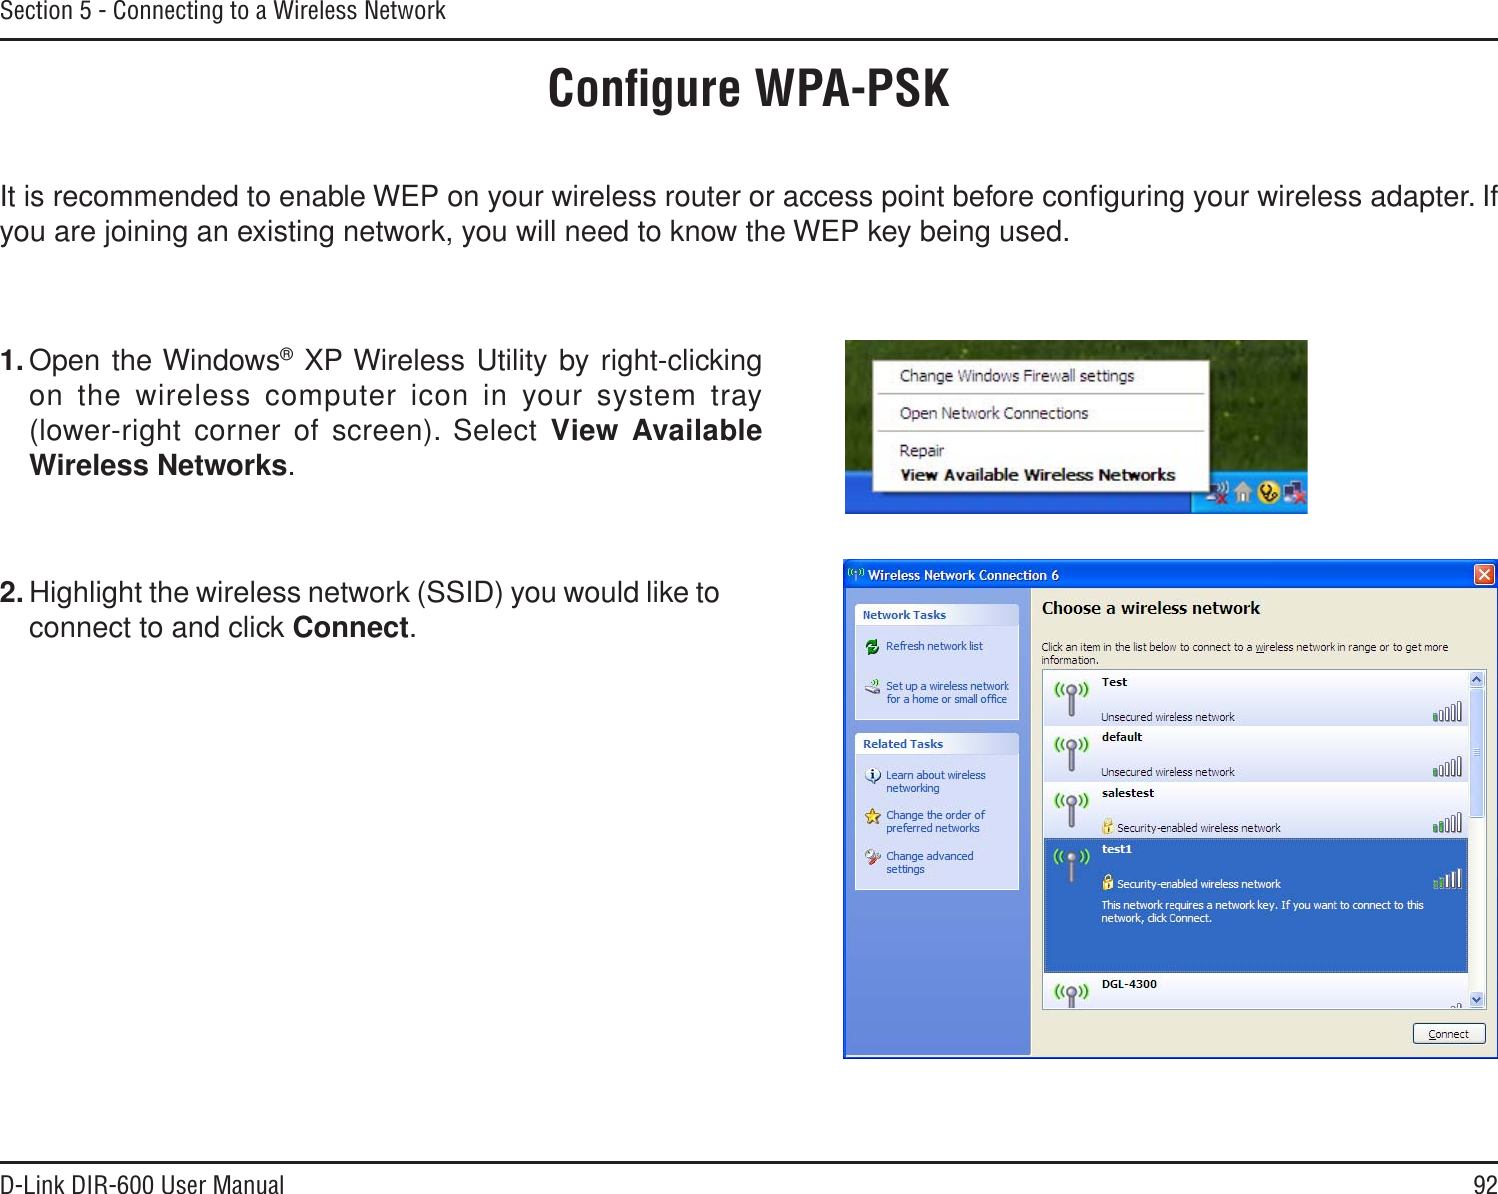 92D-Link DIR-600 User ManualSection 5 - Connecting to a Wireless NetworkConﬁgure WPA-PSKIt is recommended to enable WEP on your wireless router or access point before conﬁguring your wireless adapter. If you are joining an existing network, you will need to know the WEP key being used.2. Highlight the wireless network (SSID) you would like to connect to and click Connect.1. Open the Windows® XP Wireless Utility by right-clicking on the wireless computer icon in your system tray (lower-right corner of screen). Select View AvailableWireless Networks. 